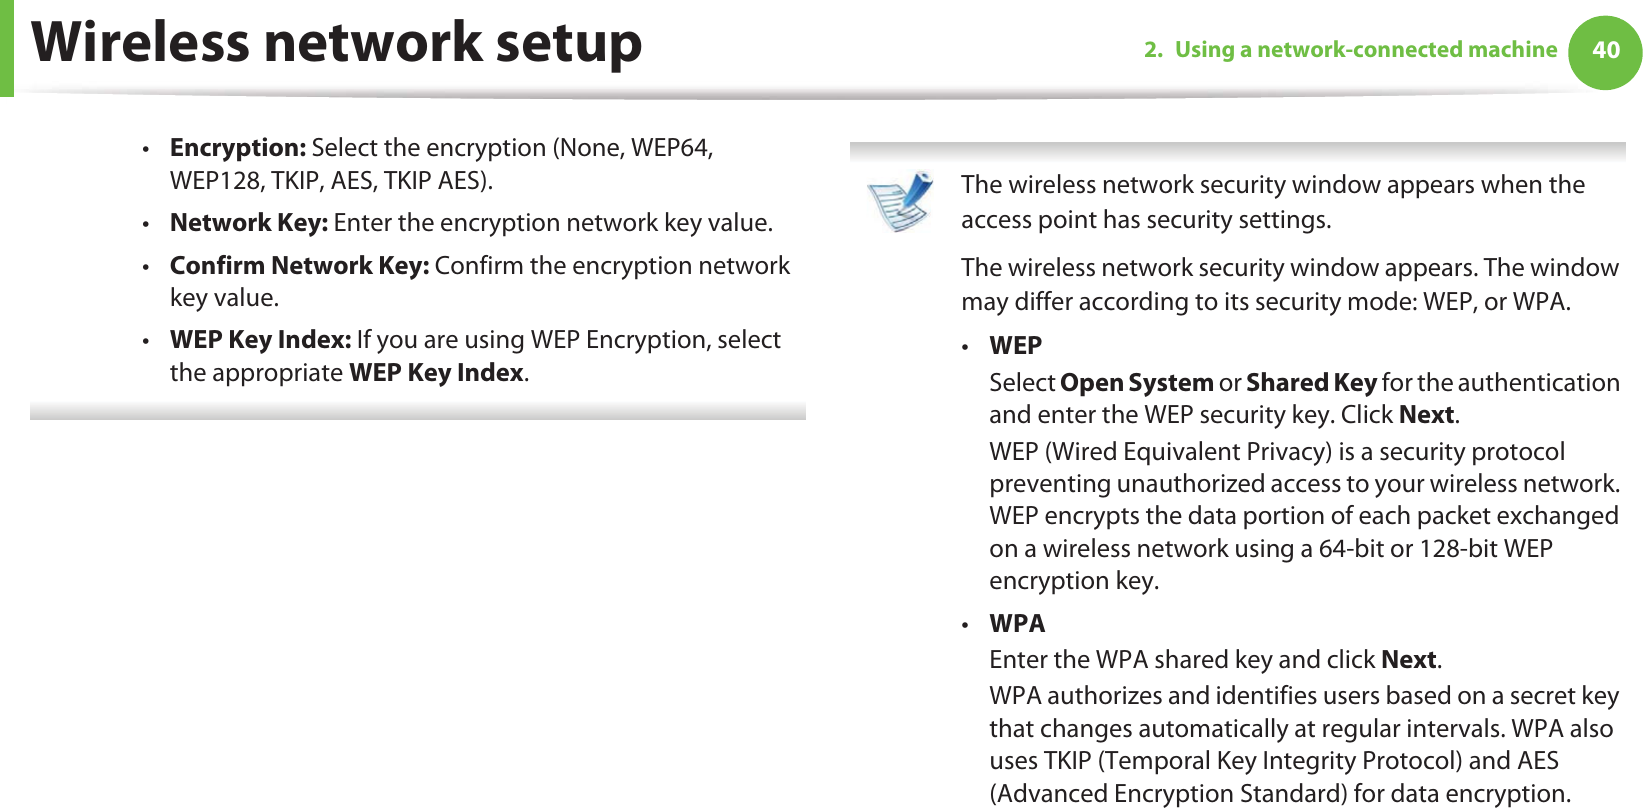 Wireless network setup 402. Using a network-connected machine•Encryption: Select the encryption (None, WEP64, WEP128, TKIP, AES, TKIP AES).•Network Key: Enter the encryption network key value.•Confirm Network Key: Confirm the encryption network key value.•WEP Key Index: If you are using WEP Encryption, select the appropriate WEP Key Index.  The wireless network security window appears when the access point has security settings.The wireless network security window appears. The window may differ according to its security mode: WEP, or WPA.•WEPSelect Open System or Shared Key for the authentication and enter the WEP security key. Click Next.WEP (Wired Equivalent Privacy) is a security protocol preventing unauthorized access to your wireless network. WEP encrypts the data portion of each packet exchanged on a wireless network using a 64-bit or 128-bit WEP encryption key.•WPAEnter the WPA shared key and click Next.WPA authorizes and identifies users based on a secret key that changes automatically at regular intervals. WPA also uses TKIP (Temporal Key Integrity Protocol) and AES (Advanced Encryption Standard) for data encryption. 